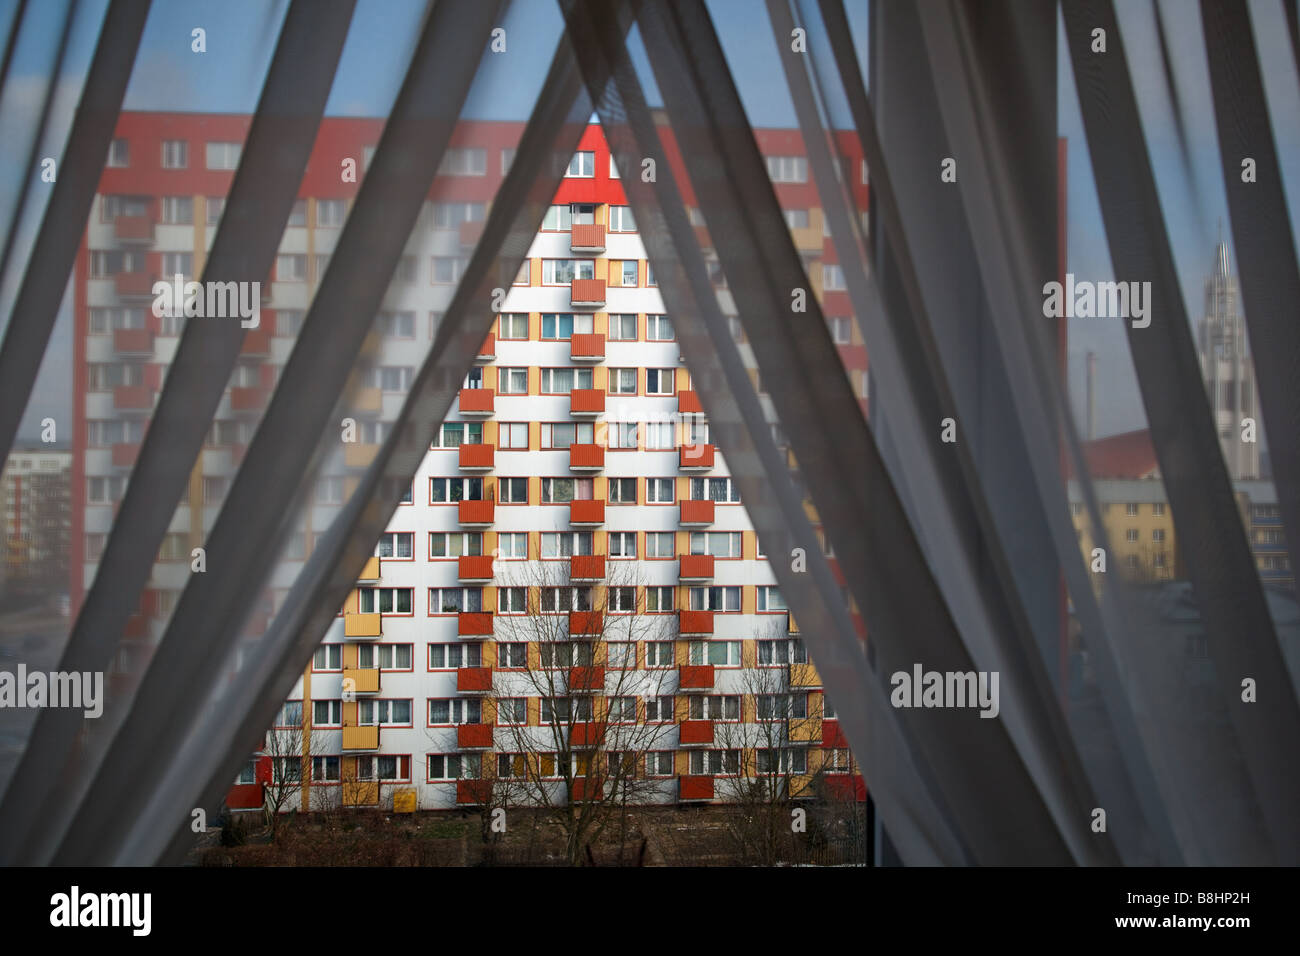 Socialist highrise blocks from the end of 70s in Bialystok in Eastern Poland Stock Photo